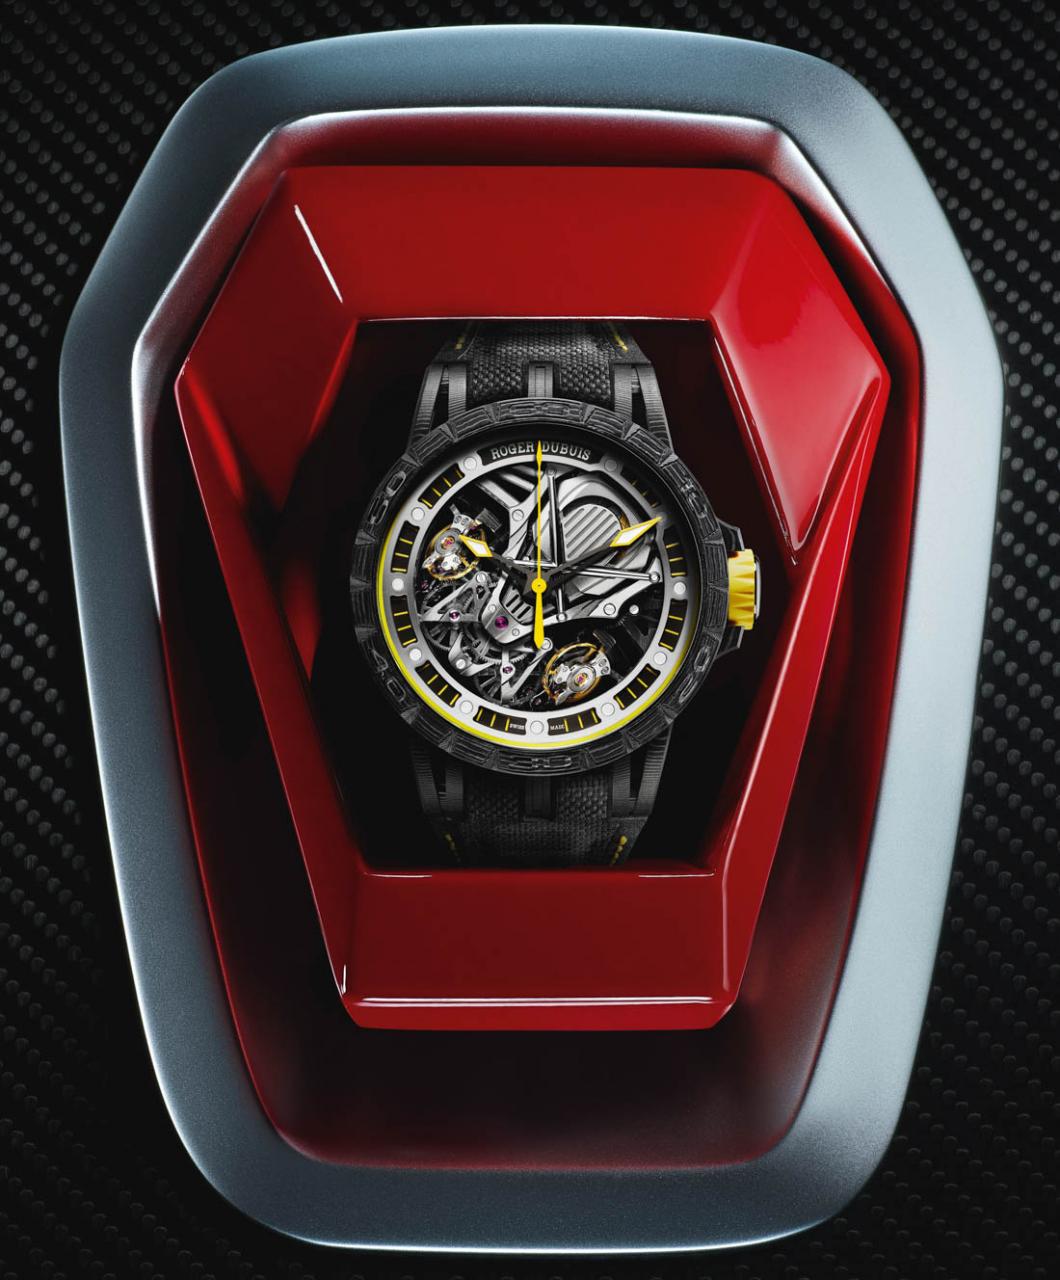 Roger Dubuis Becomes Official Partner Of Lamborghini, Launches 2 Watches With All-New Duotor Caliber Watch Releases